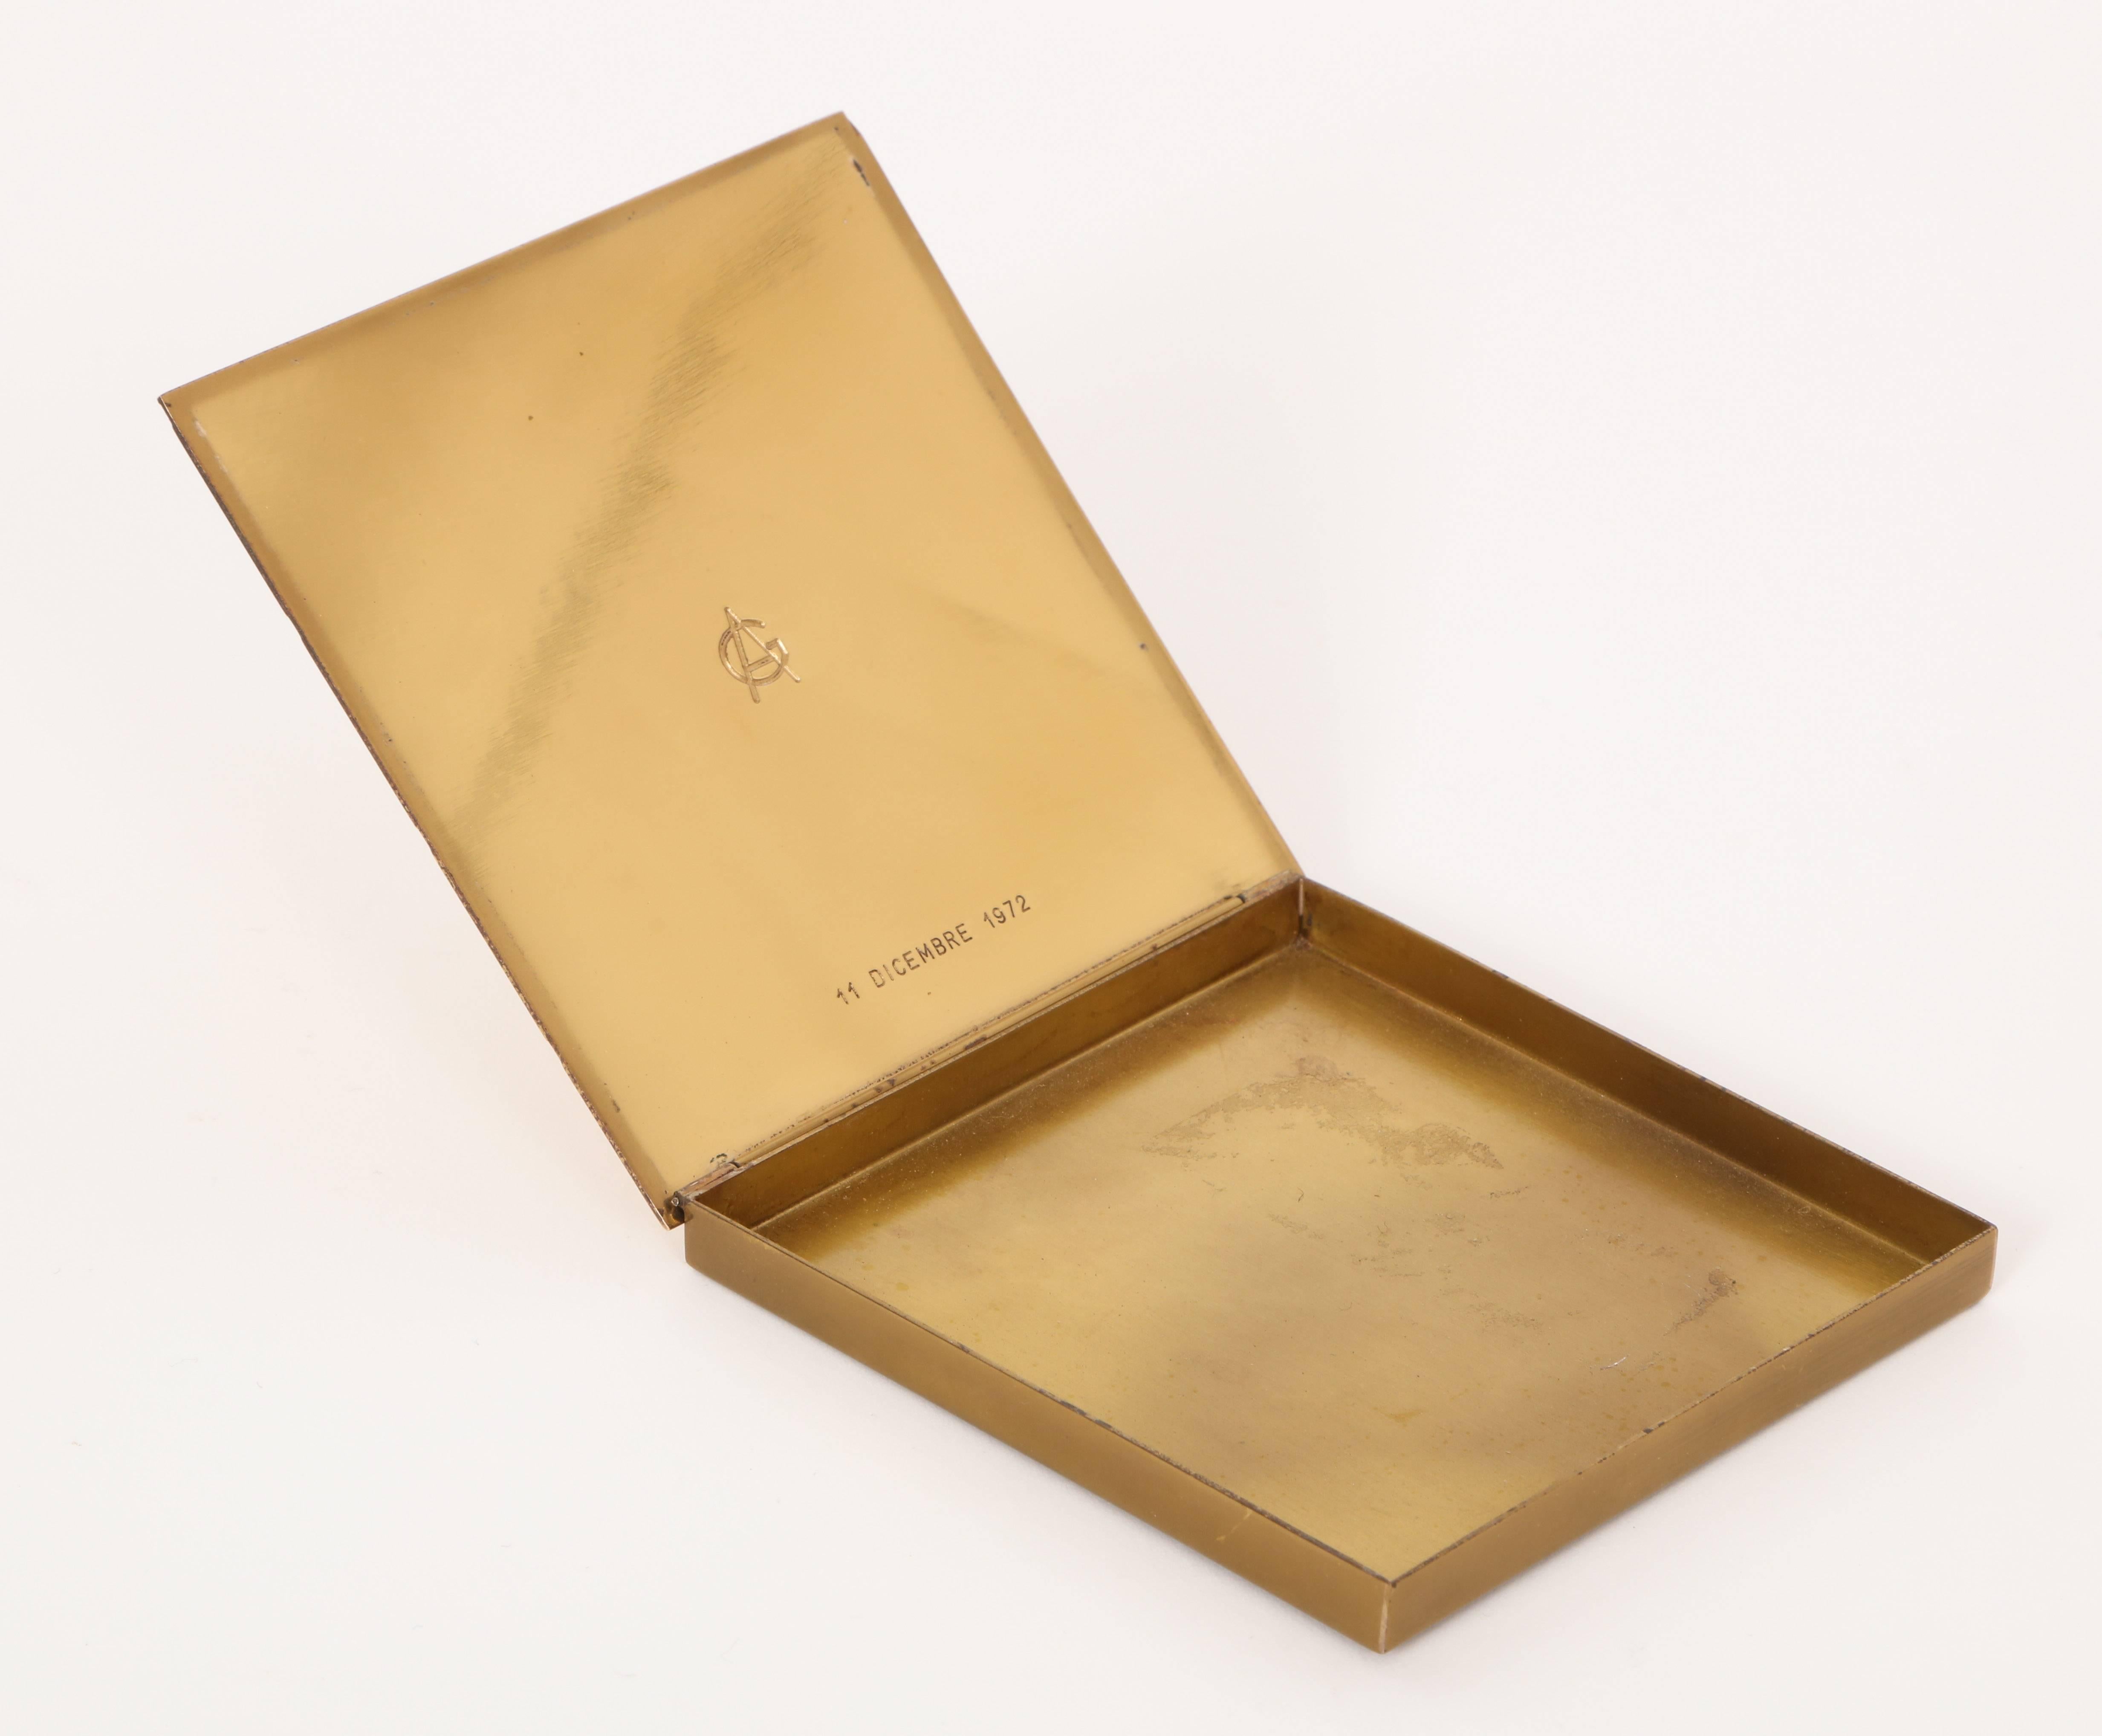 Gabriella Crespi brass pill cigarette card box Italian, 1970s

Measures: 4.4 inches wide on each side
0.3 inches deep

Born in 1922, Gabriella Crespi studies architecture at the Politecnico in Milan, where her work is permeated by her